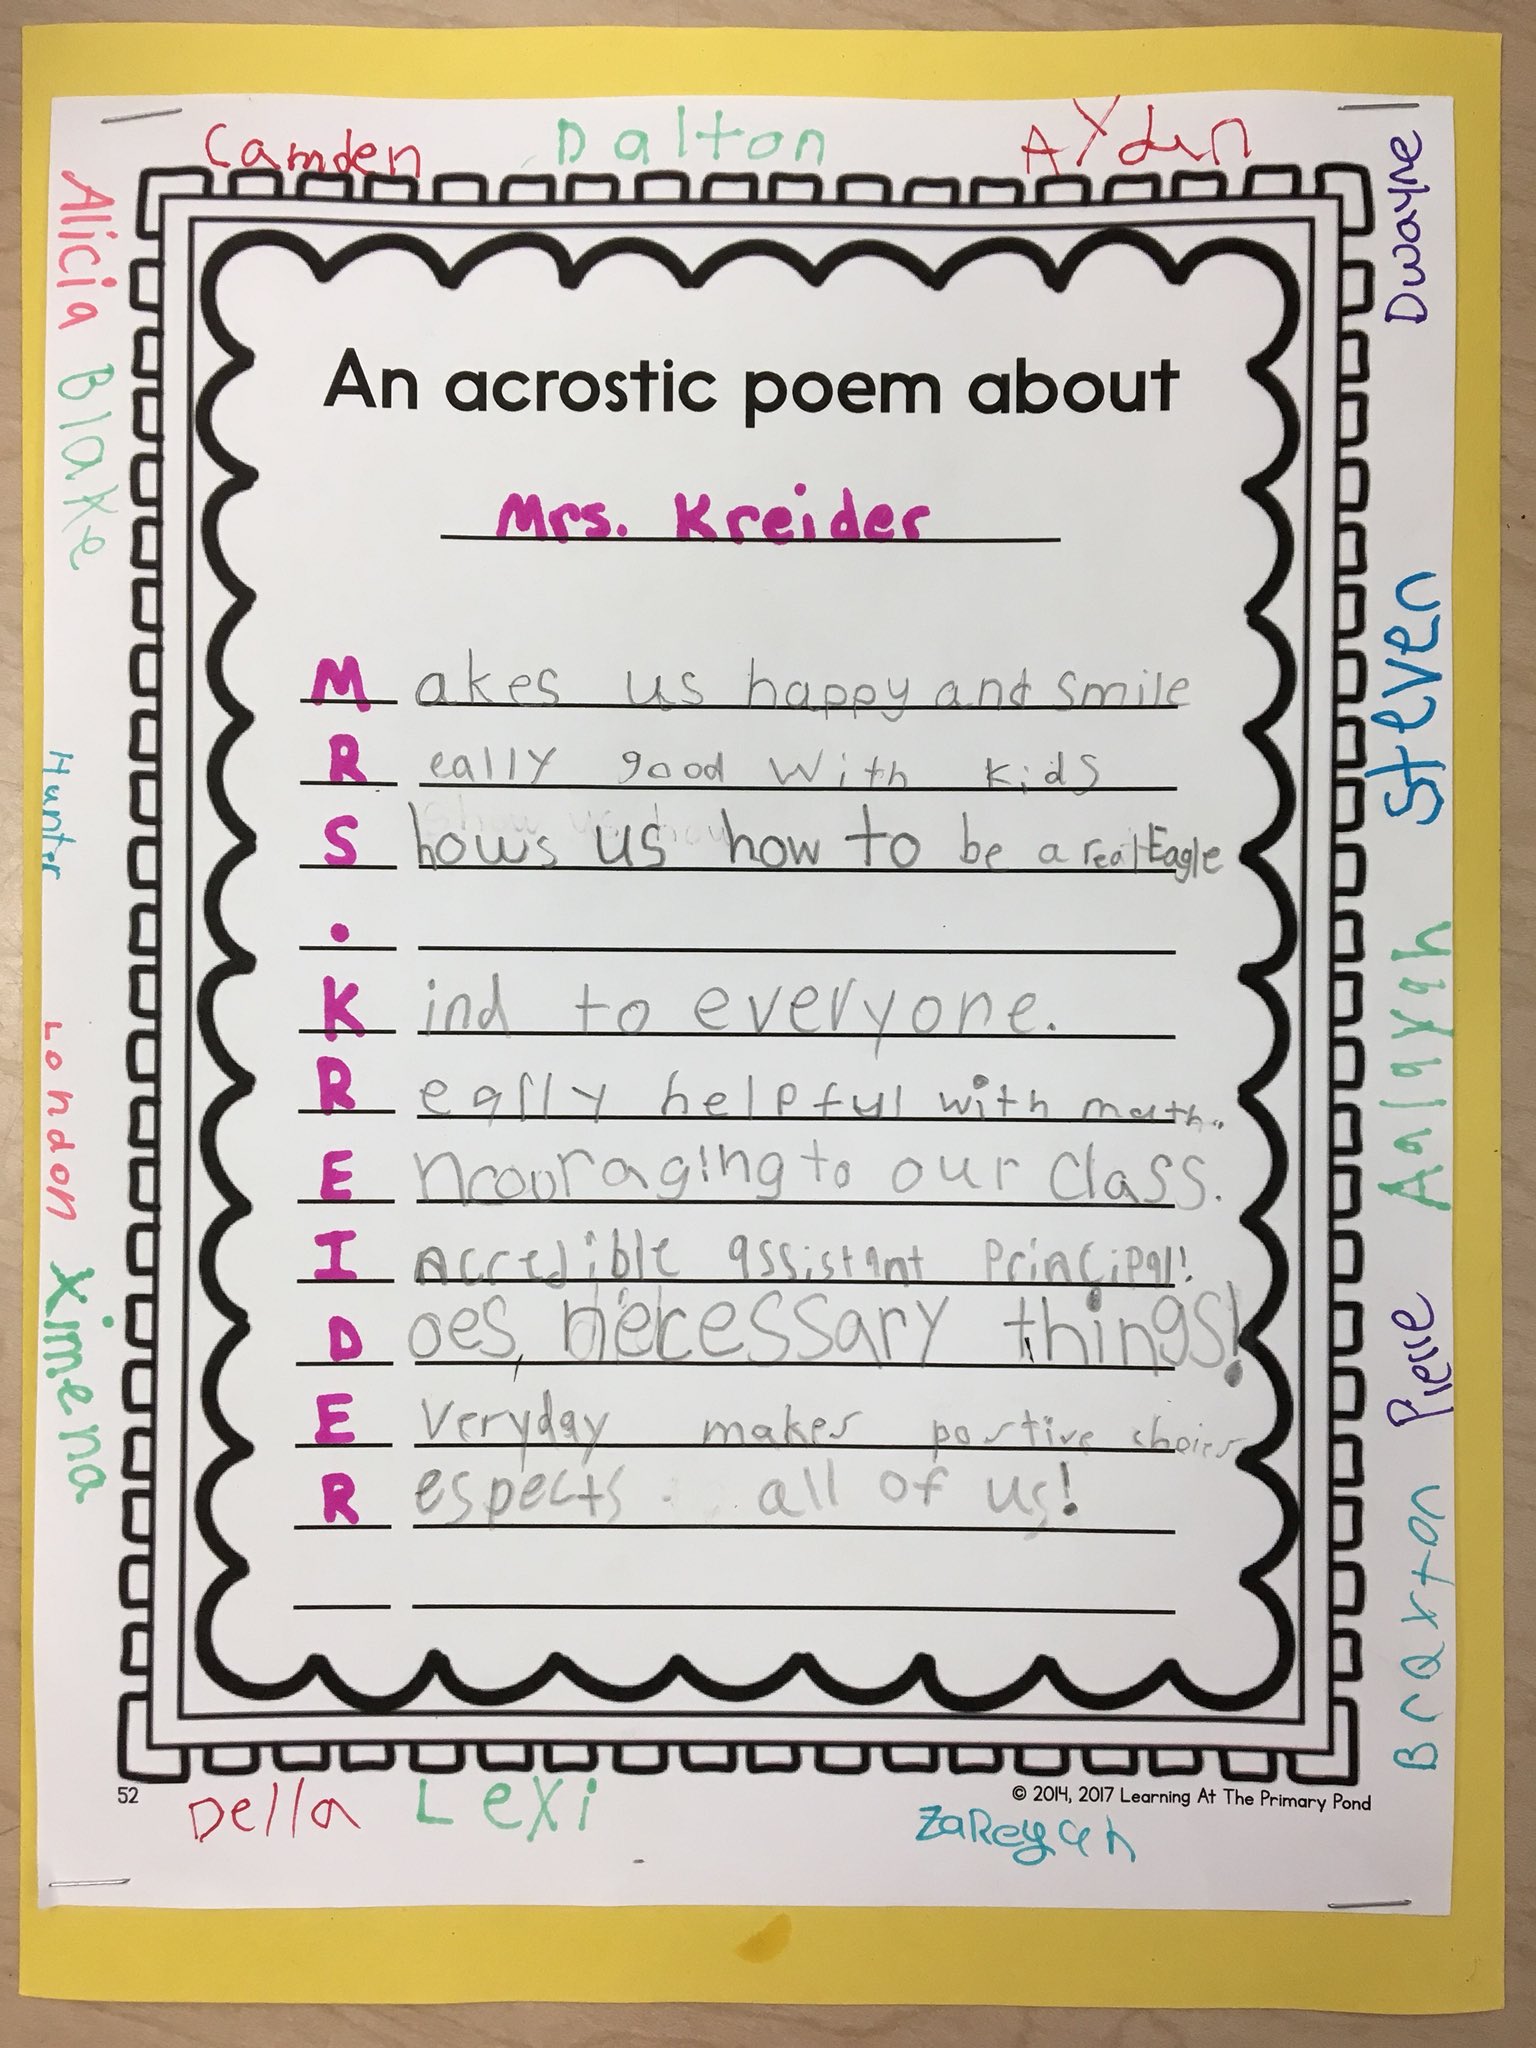 Mrs Miller S Class Students Enjoyed Working Together To Create This Acrostic Poem About Our Awesome Assistant Principal Cmkreider They Are Always Thinking Of Others Emyoderelem T Co Gzstnqdwhb